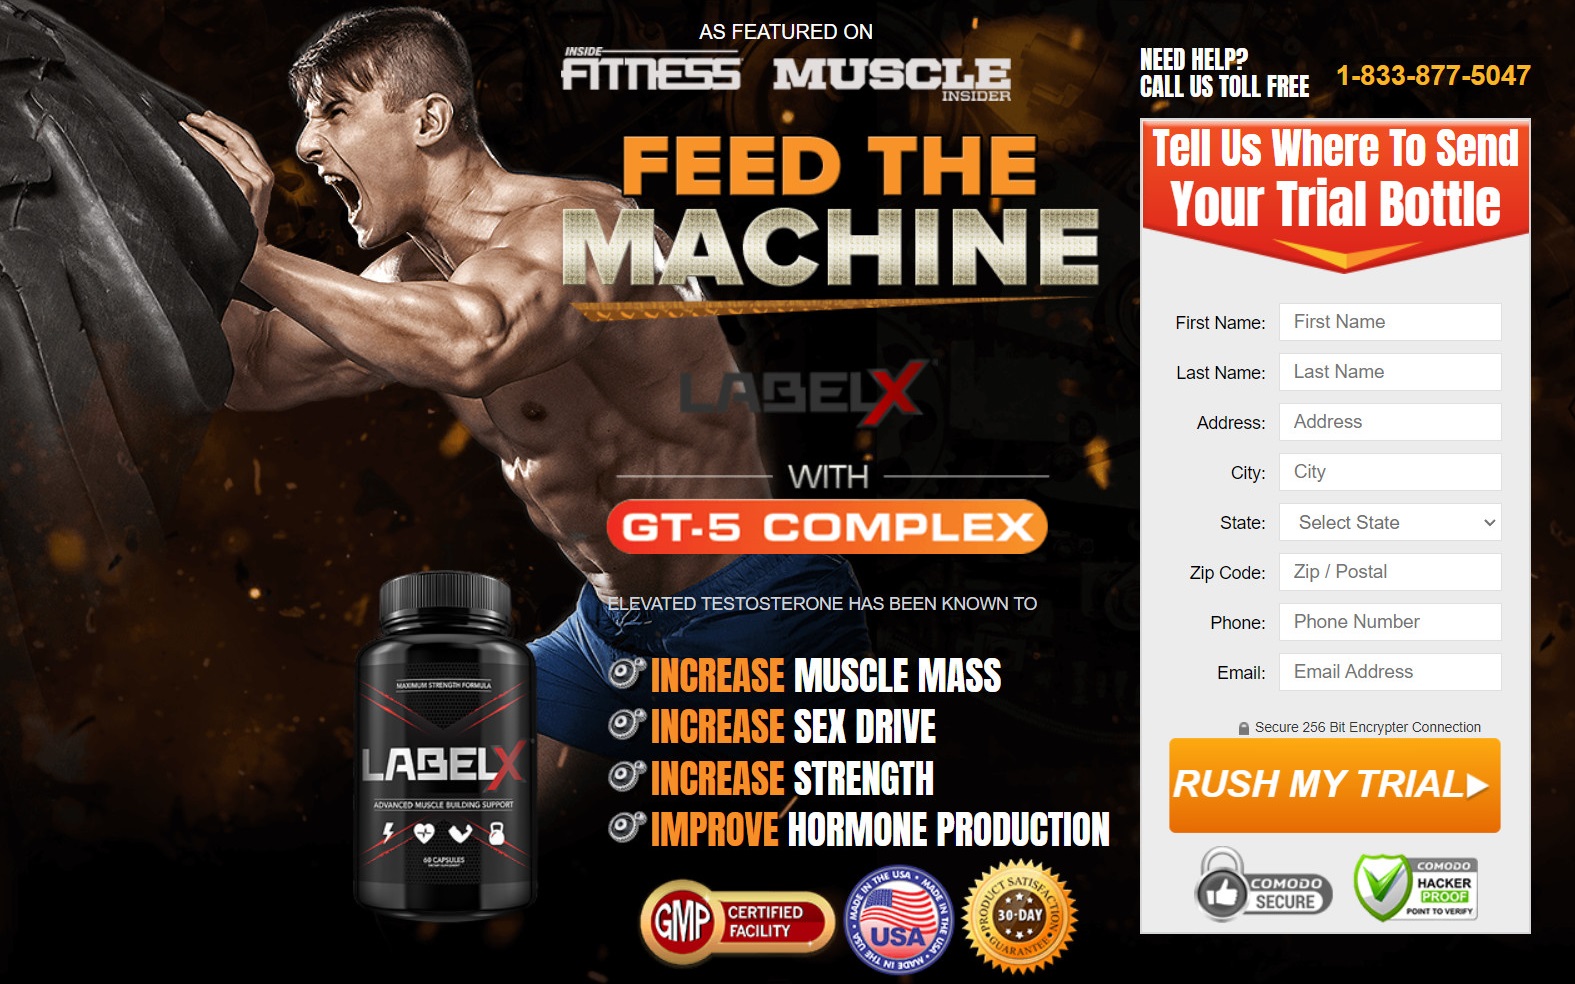 LabelX Muscle Building Support 1